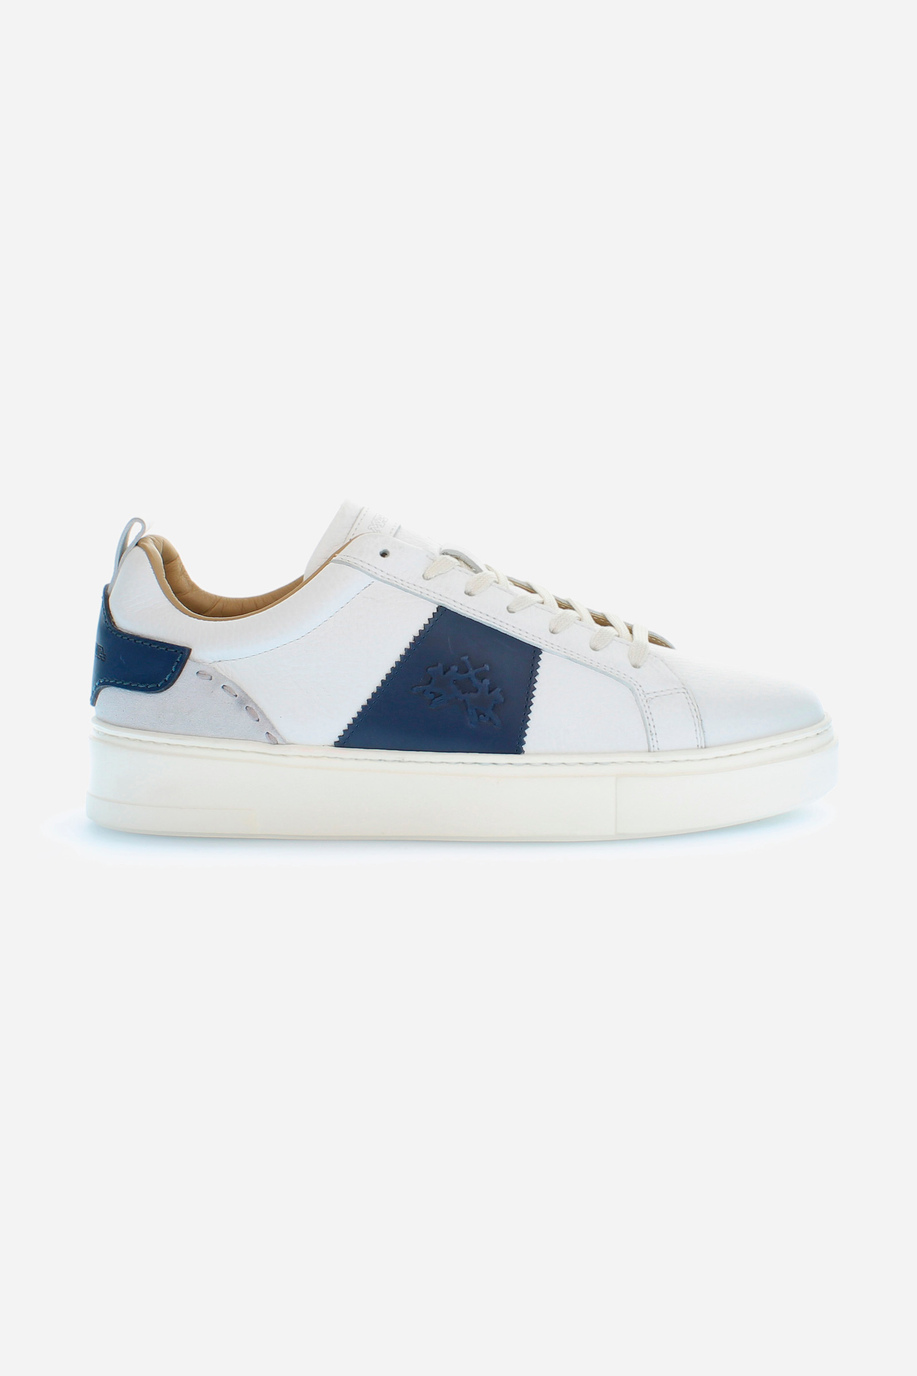 Men's trainers in leather and suede - Men | La Martina - Official Online Shop